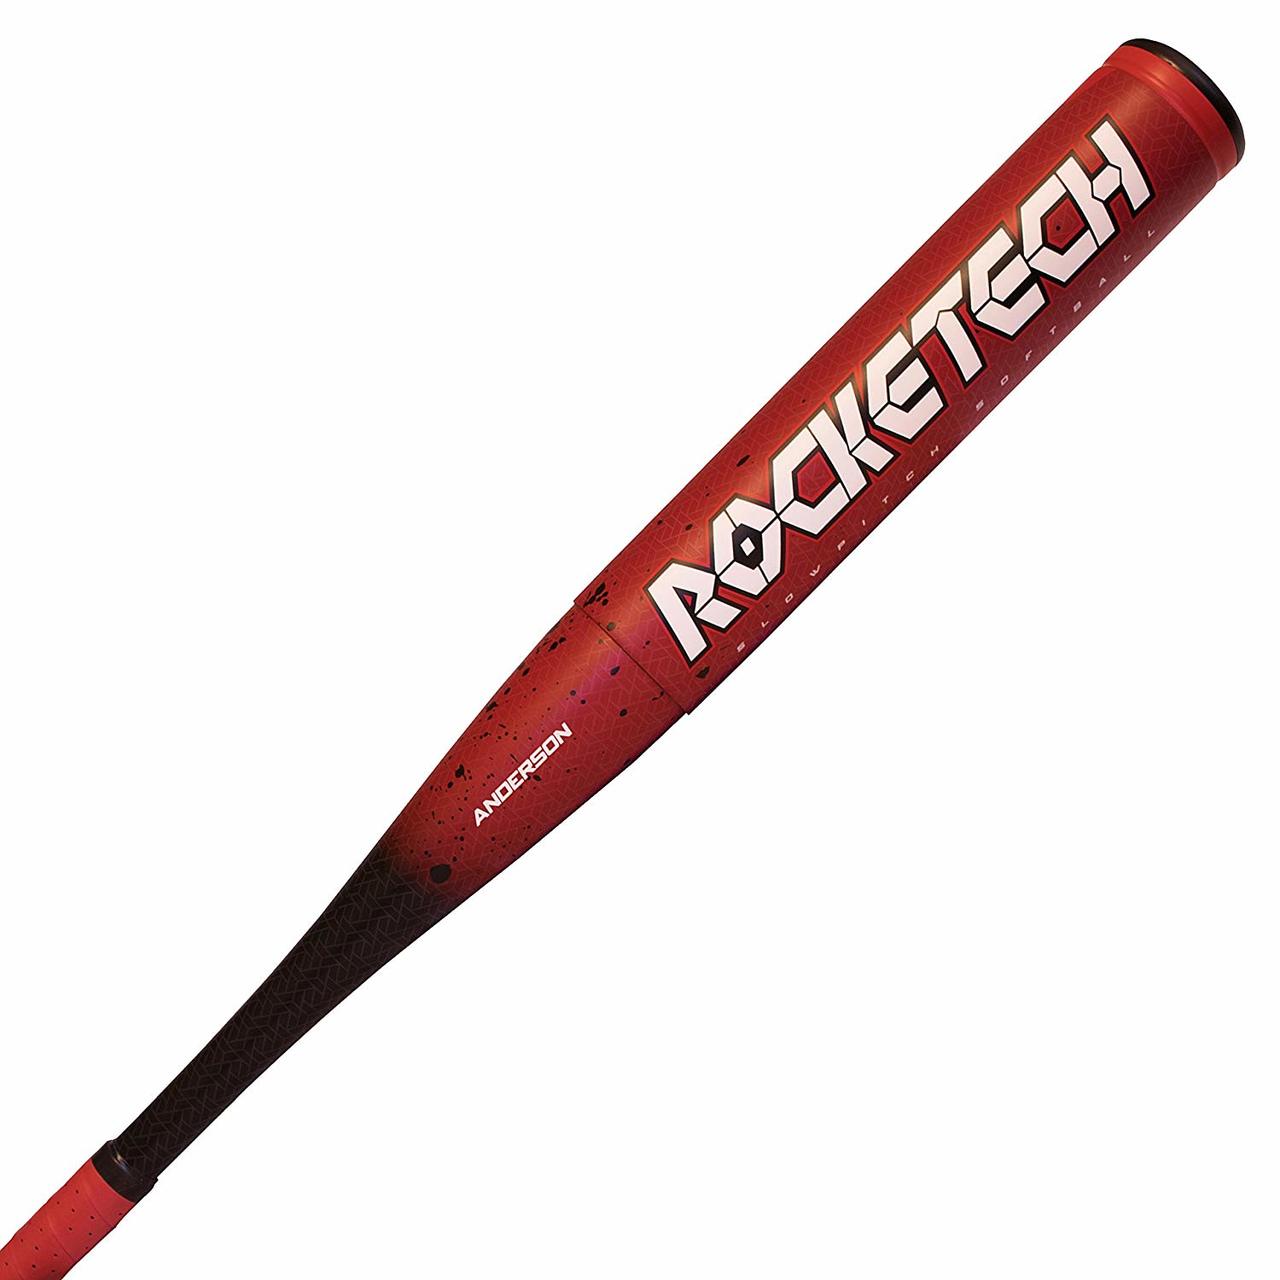 anderson-2018-rocketech-slowpitch-softball-bat-34-in-28-oz 011044-3428 Anderson 874147008607 2 ¼” Barrel Ultra-Thin whip handle for better bat speed End